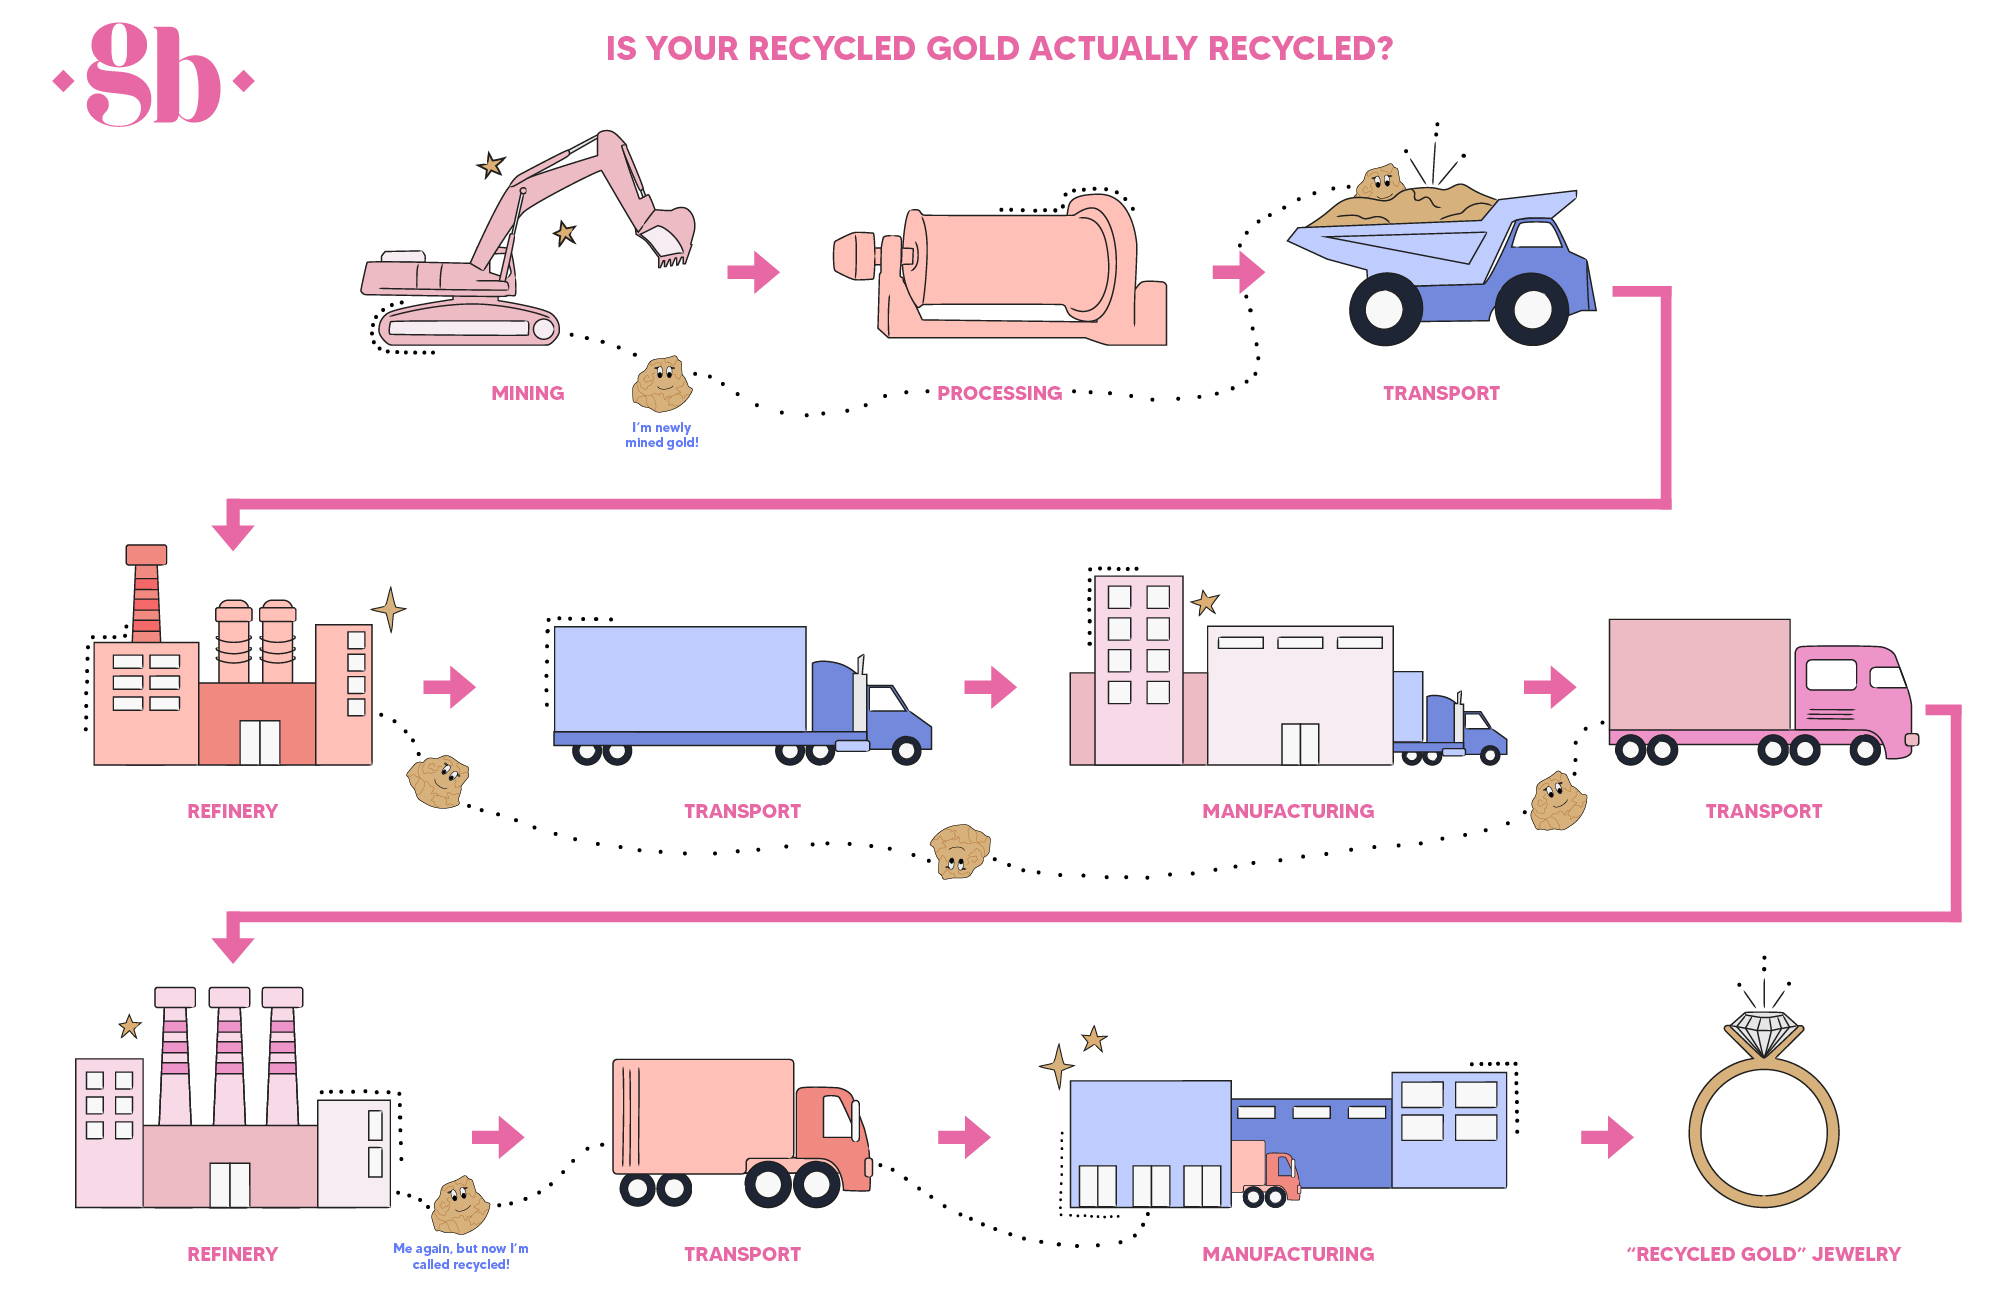 Why Recycled Gold Is a Scam